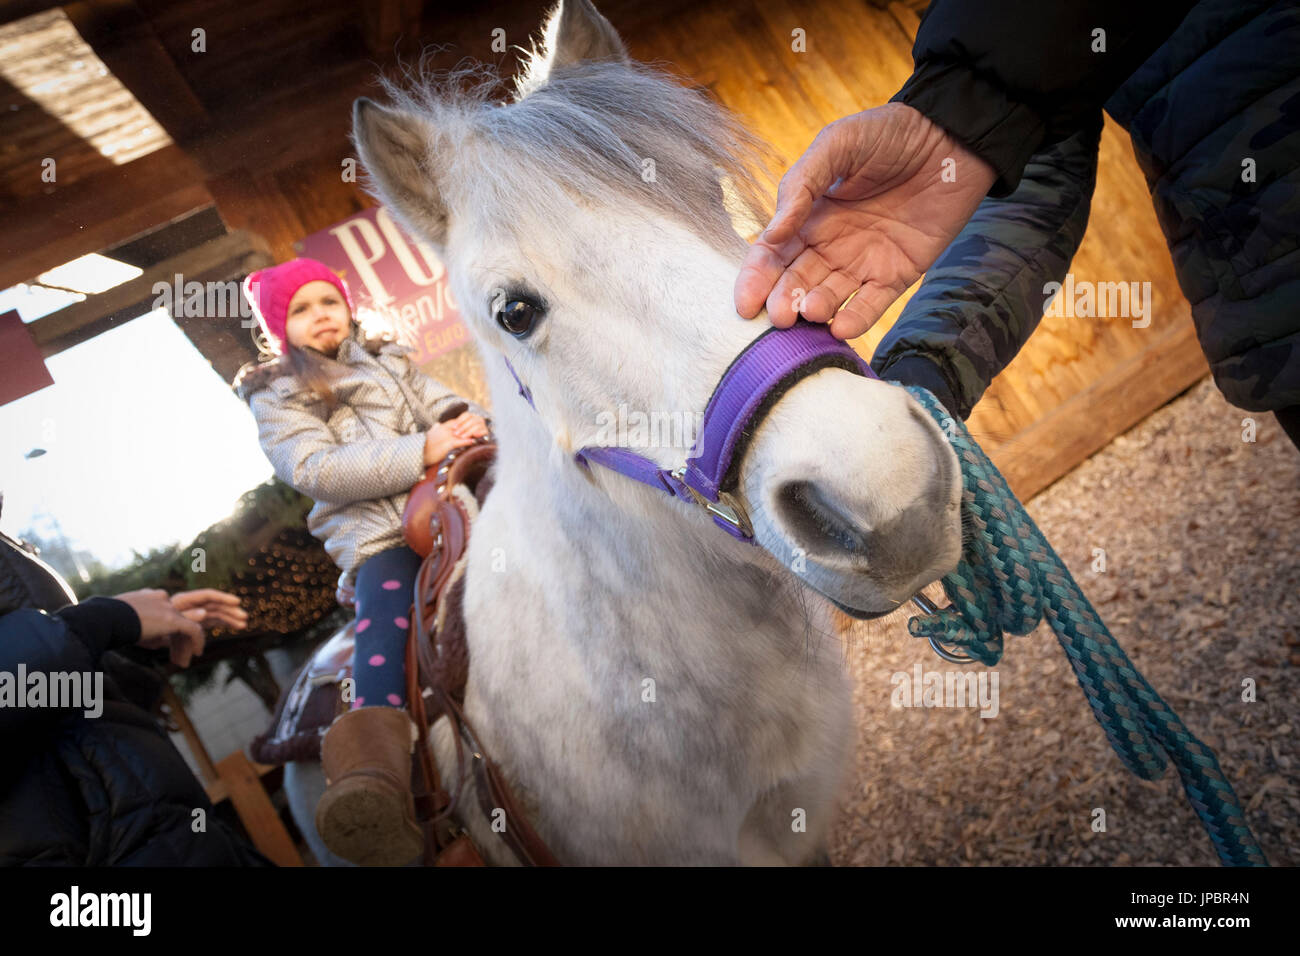 a close up of a pony with a kid sitting on it during the Christmas market, city of Bruneck, Bolzano province, South Tyrol, Trentino Alto Adige, Italy, Europe Stock Photo